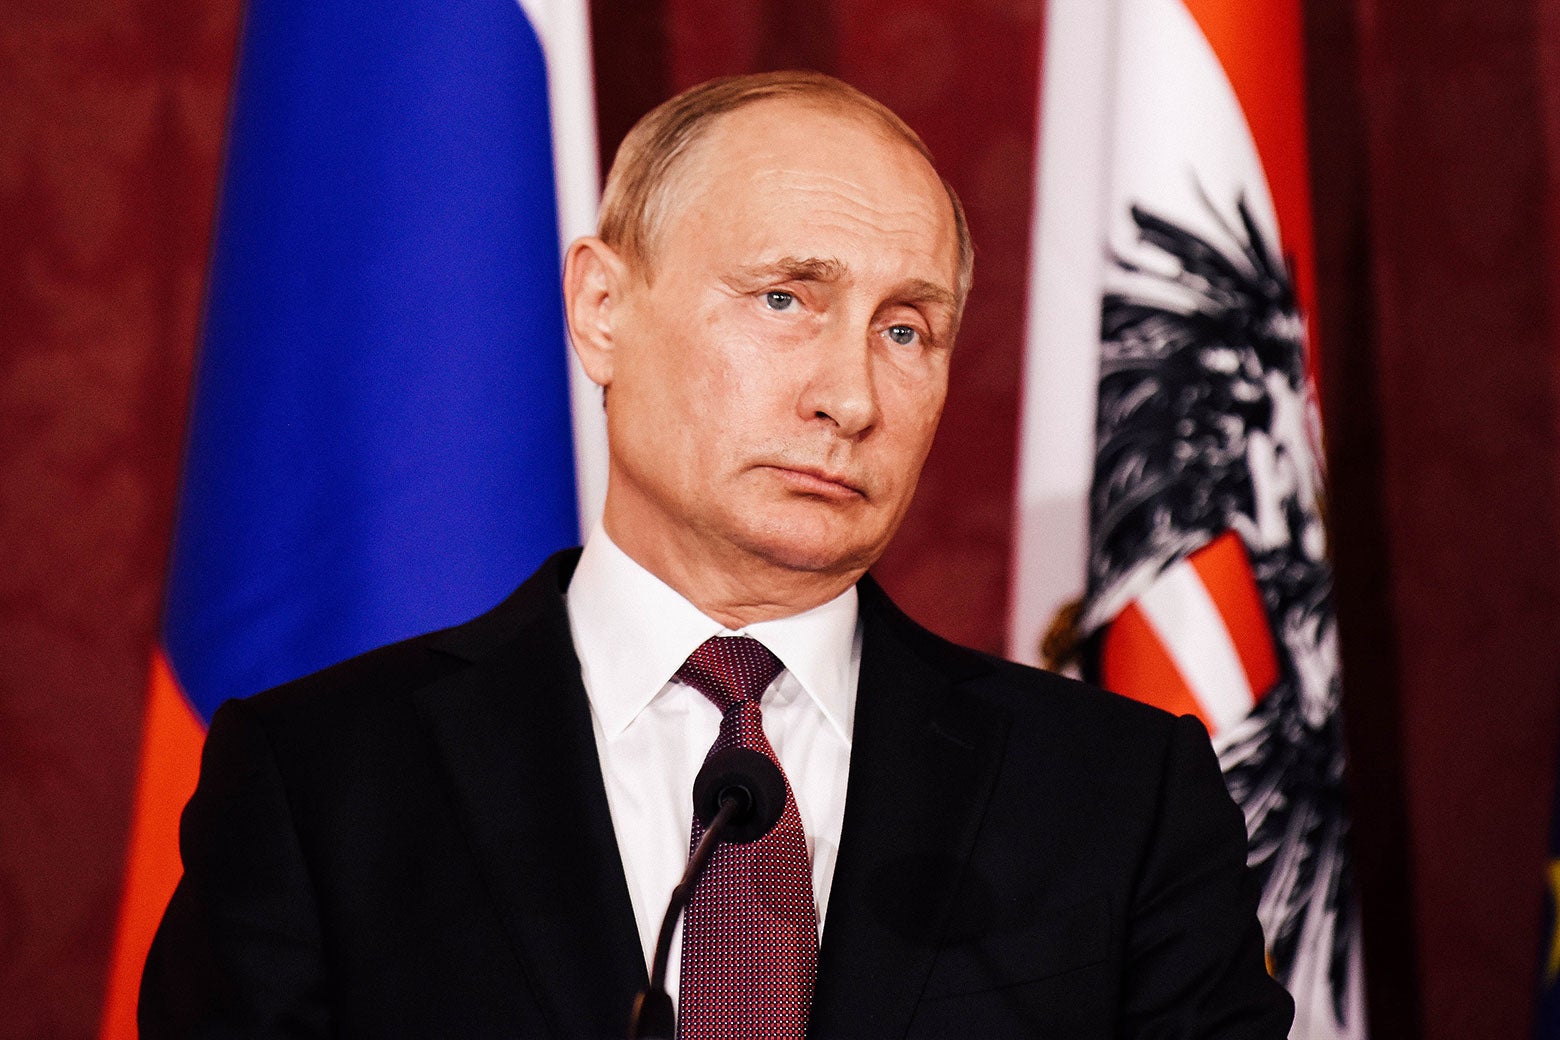 Russian President Vladimir Putin during a joint press conference on June 5 in Vienna, Austria.